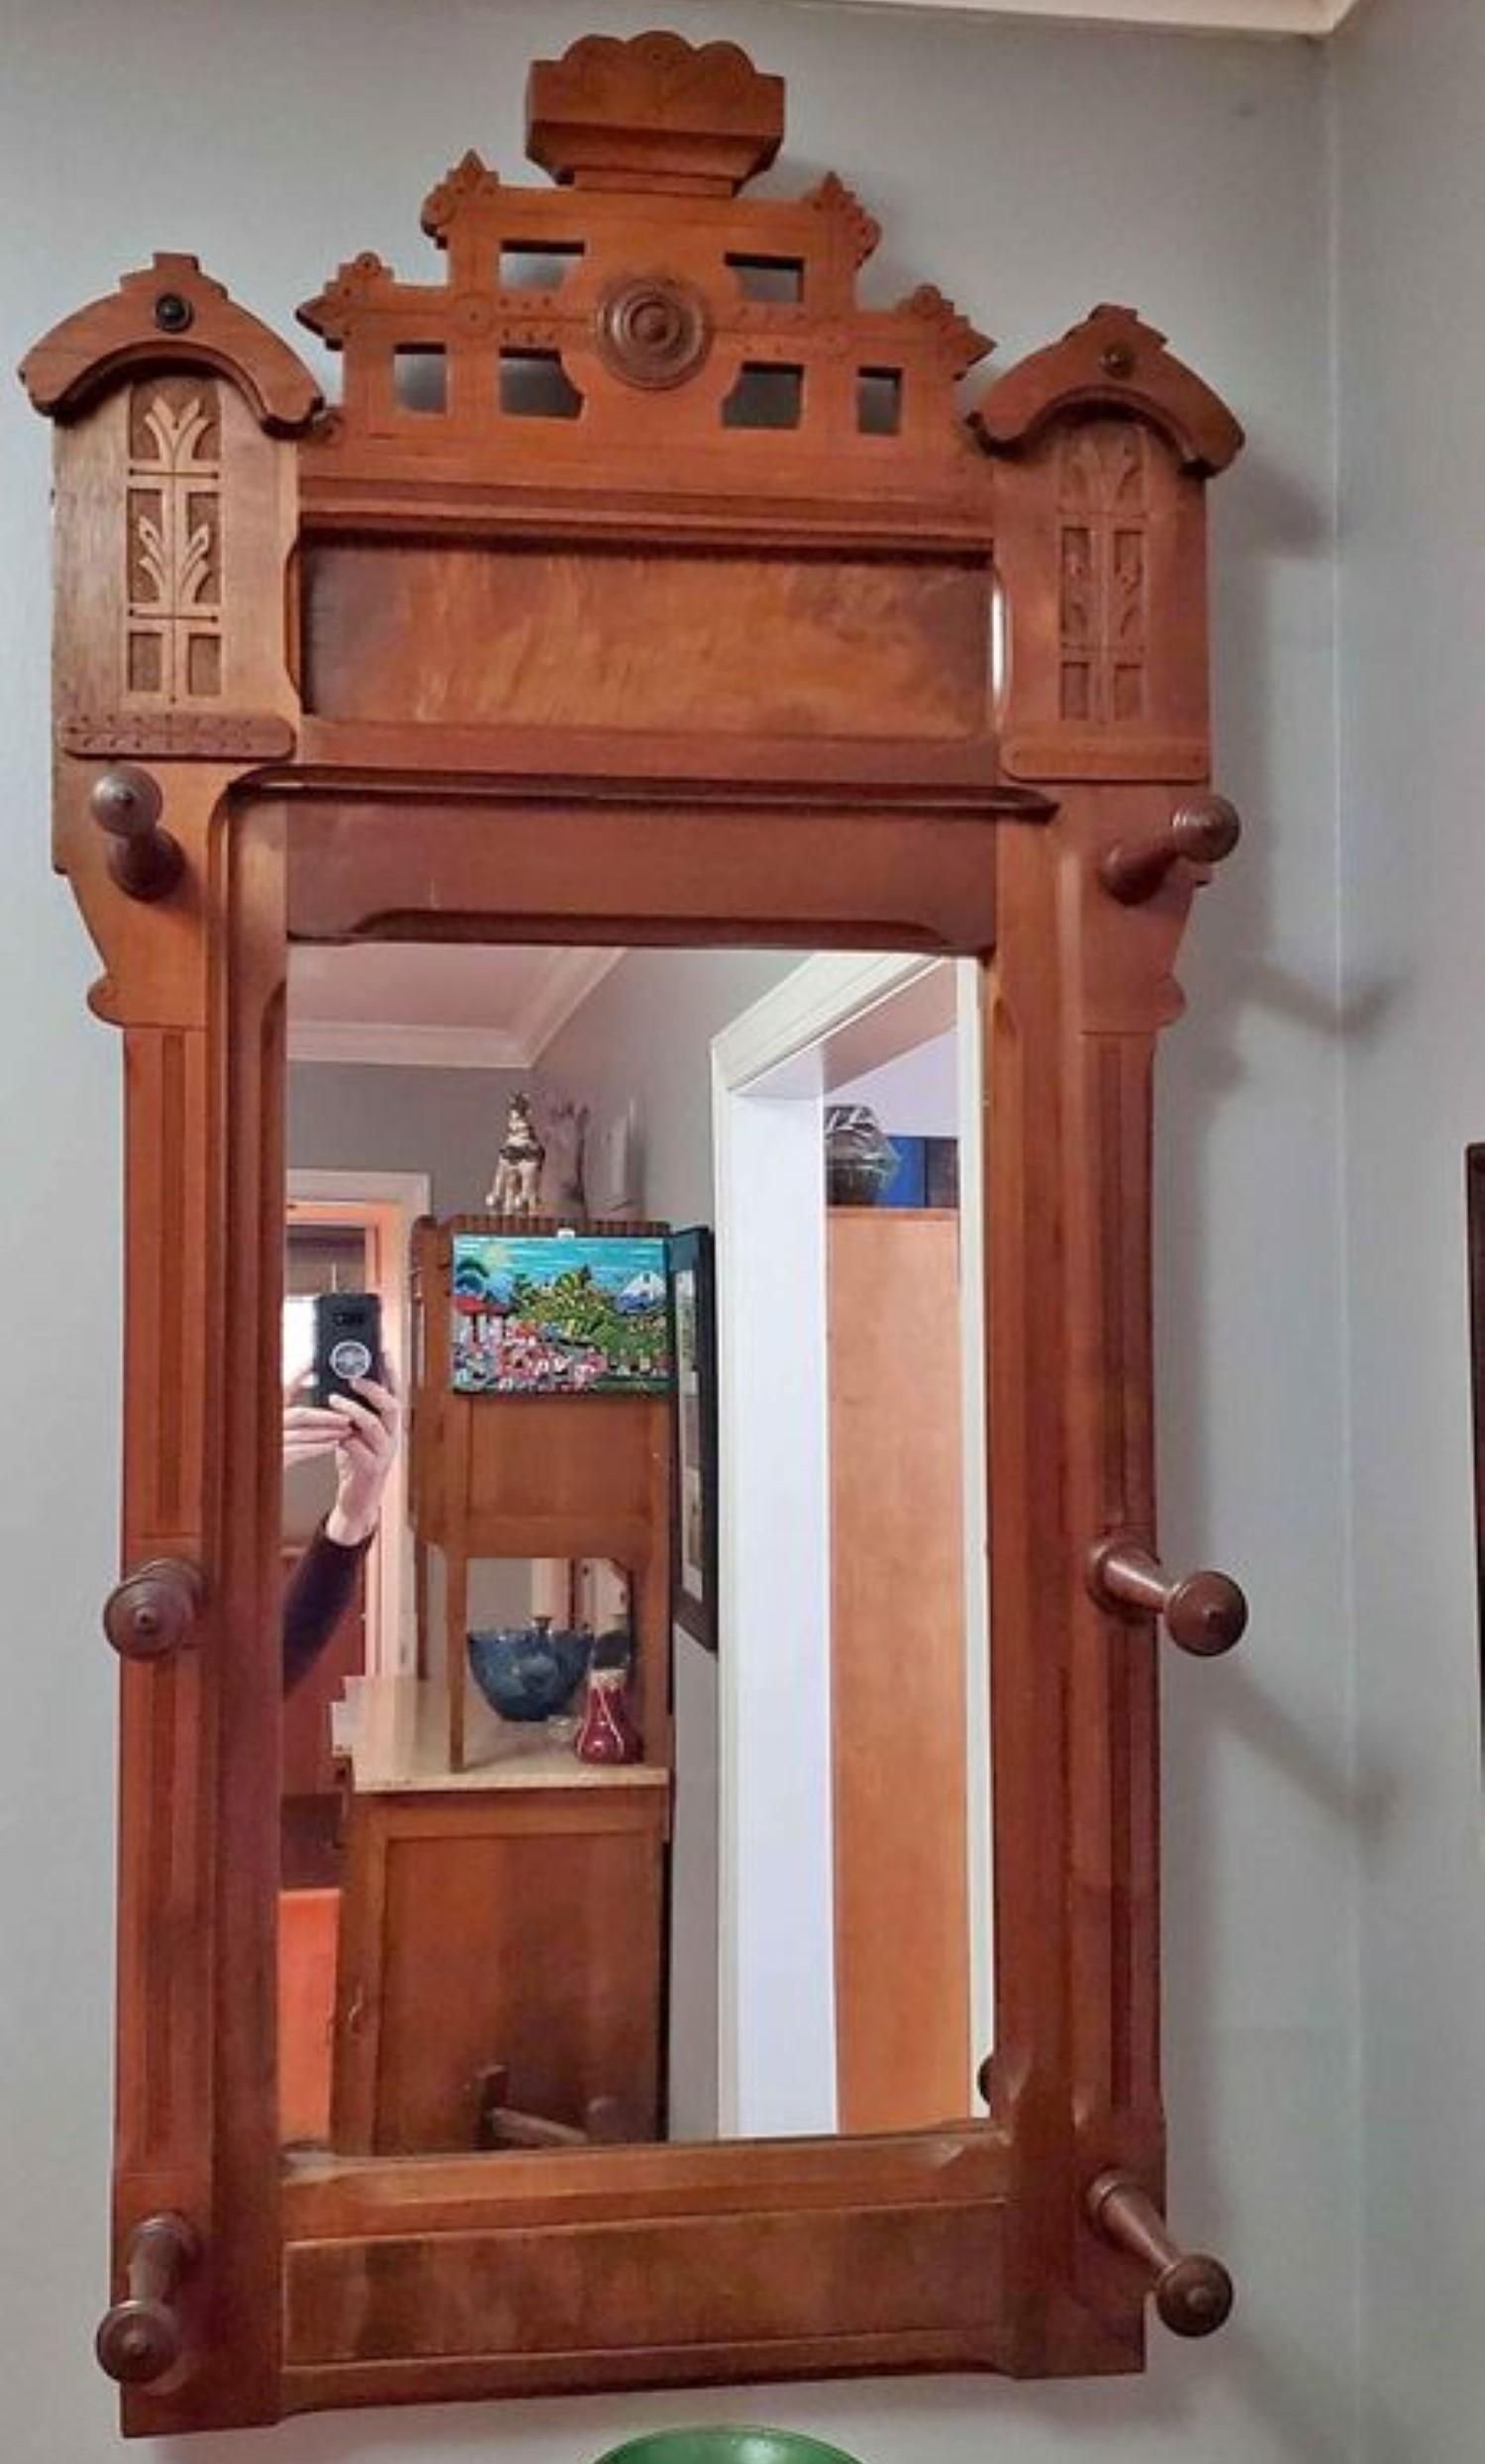 Beautiful 1880s Eastlake mirror. Hangs on wall and great for the entry hall. Six large pegs intended to hold your hats, which everyone wore back then! Dark walnut with burl inlay. Mesures: 48